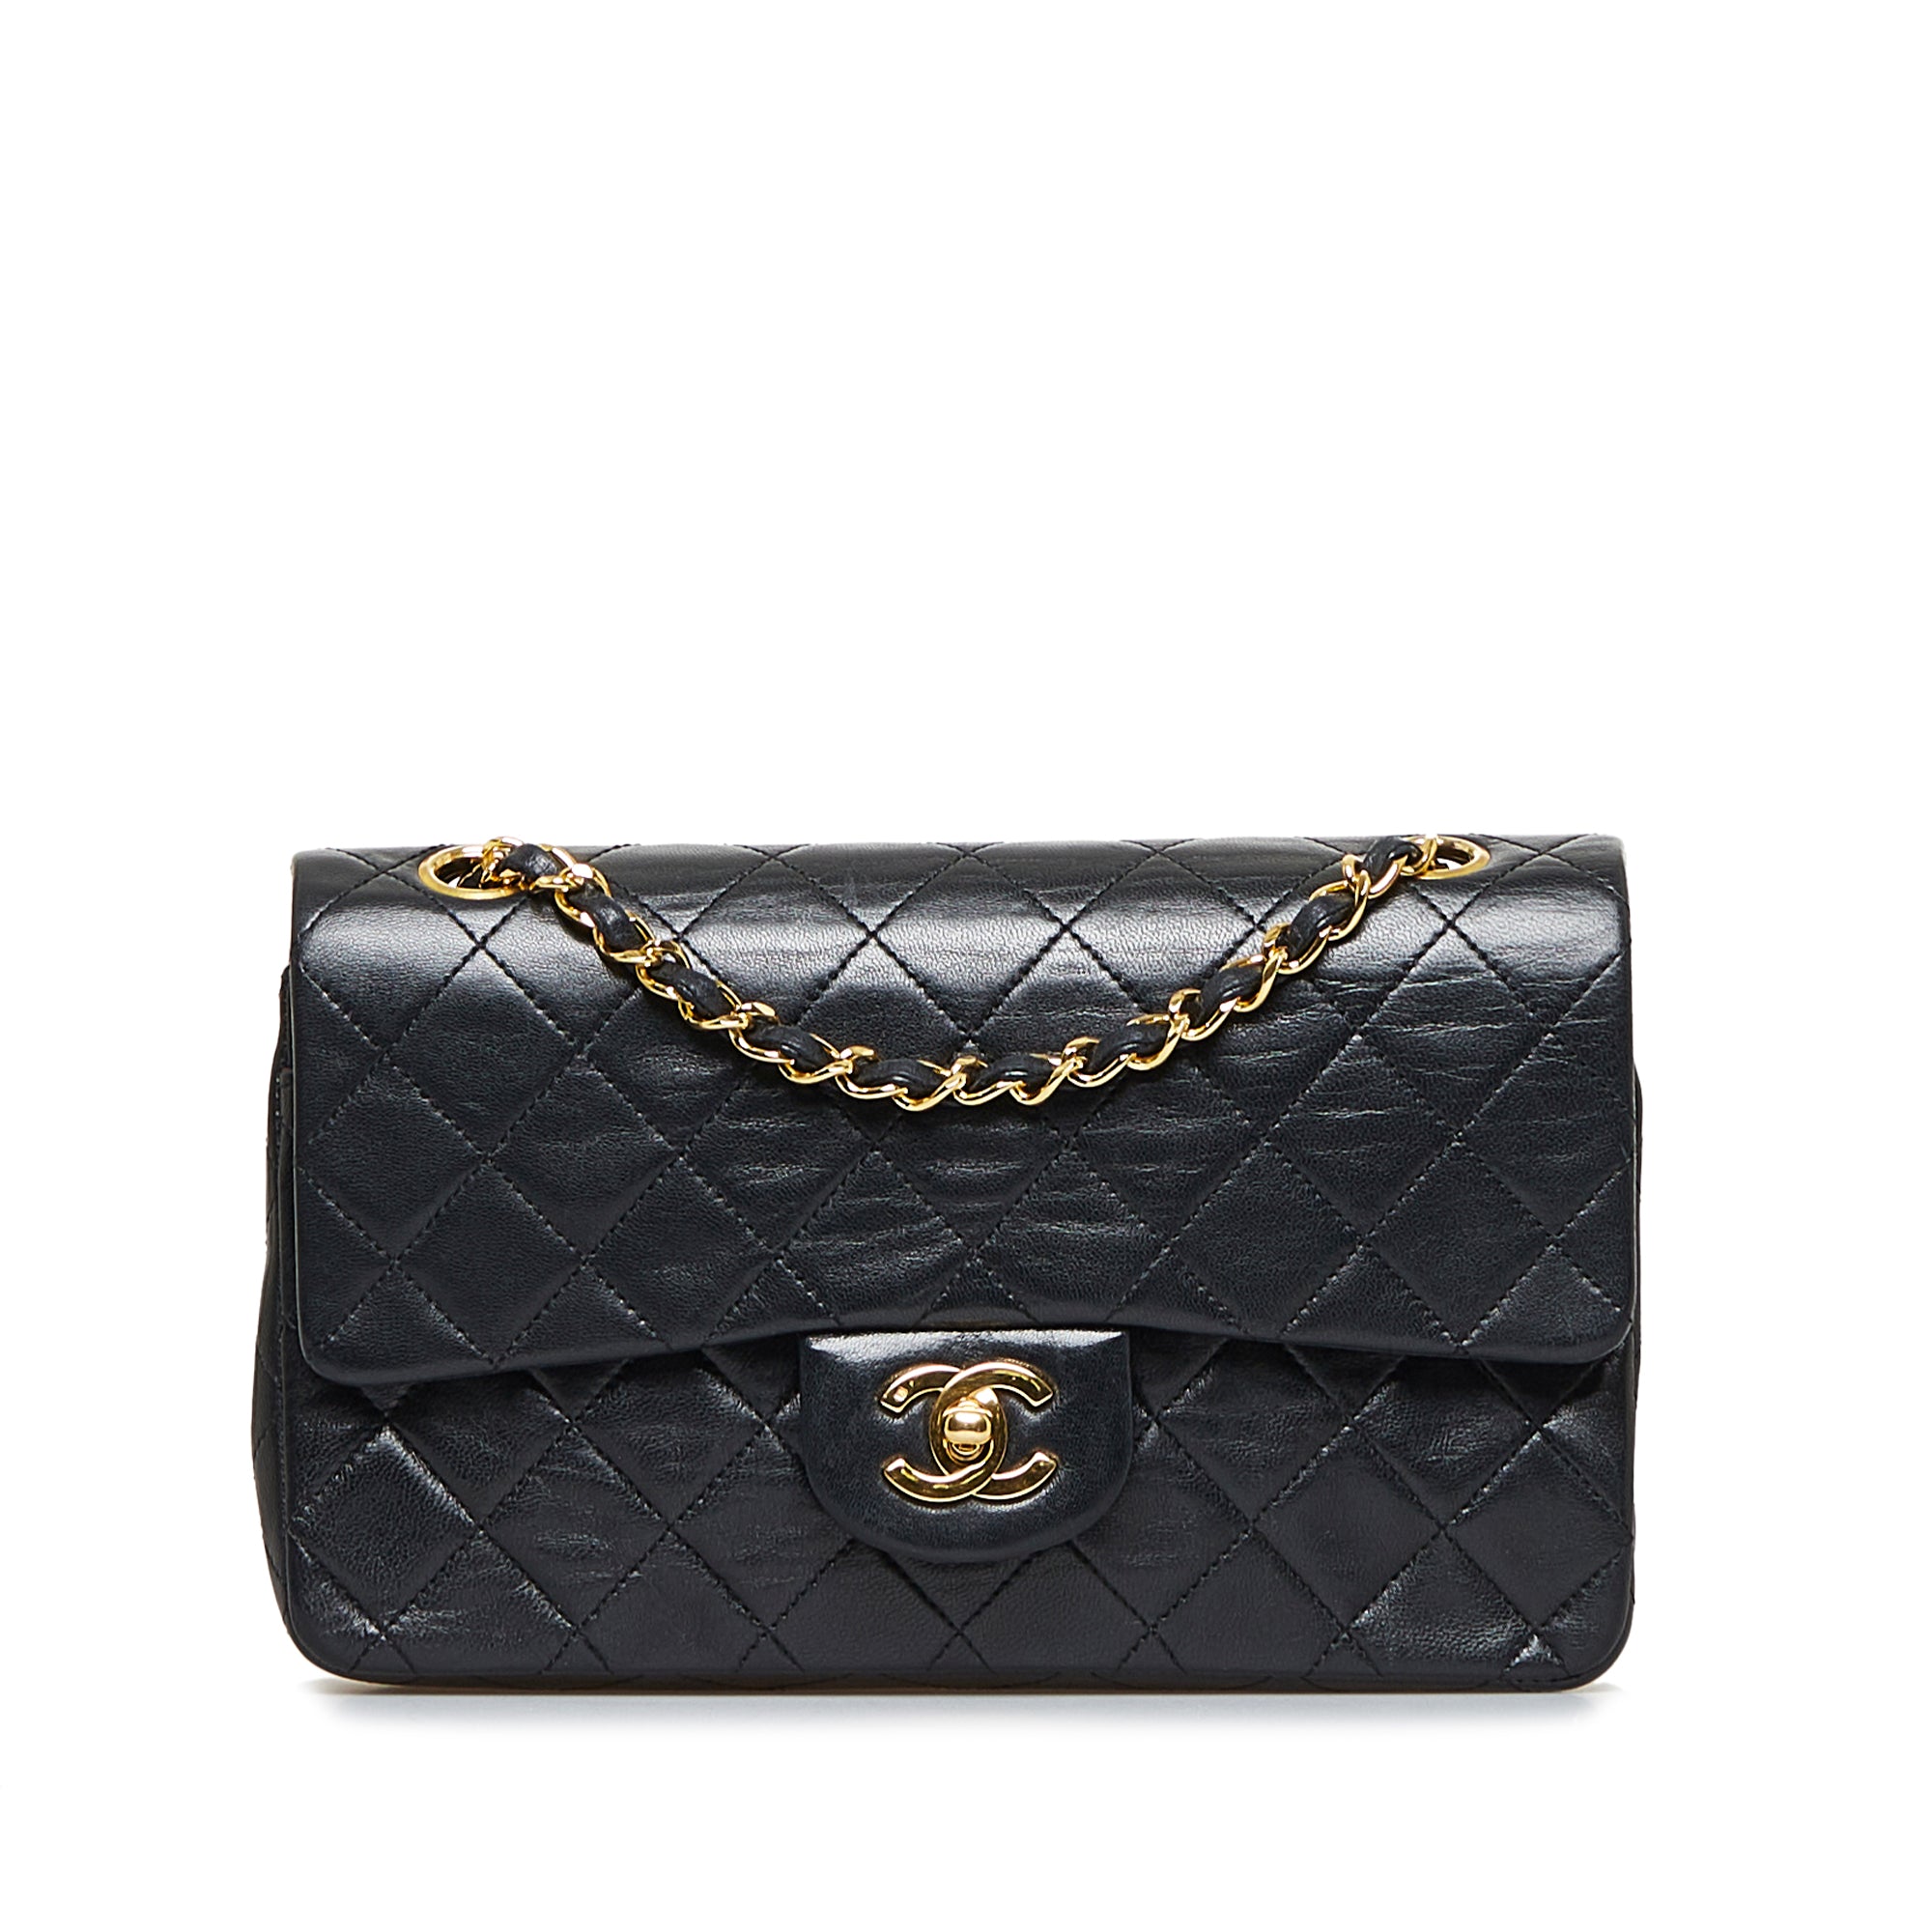 Chanel Classic Small Double Flap Bag - Black Shoulder Bags